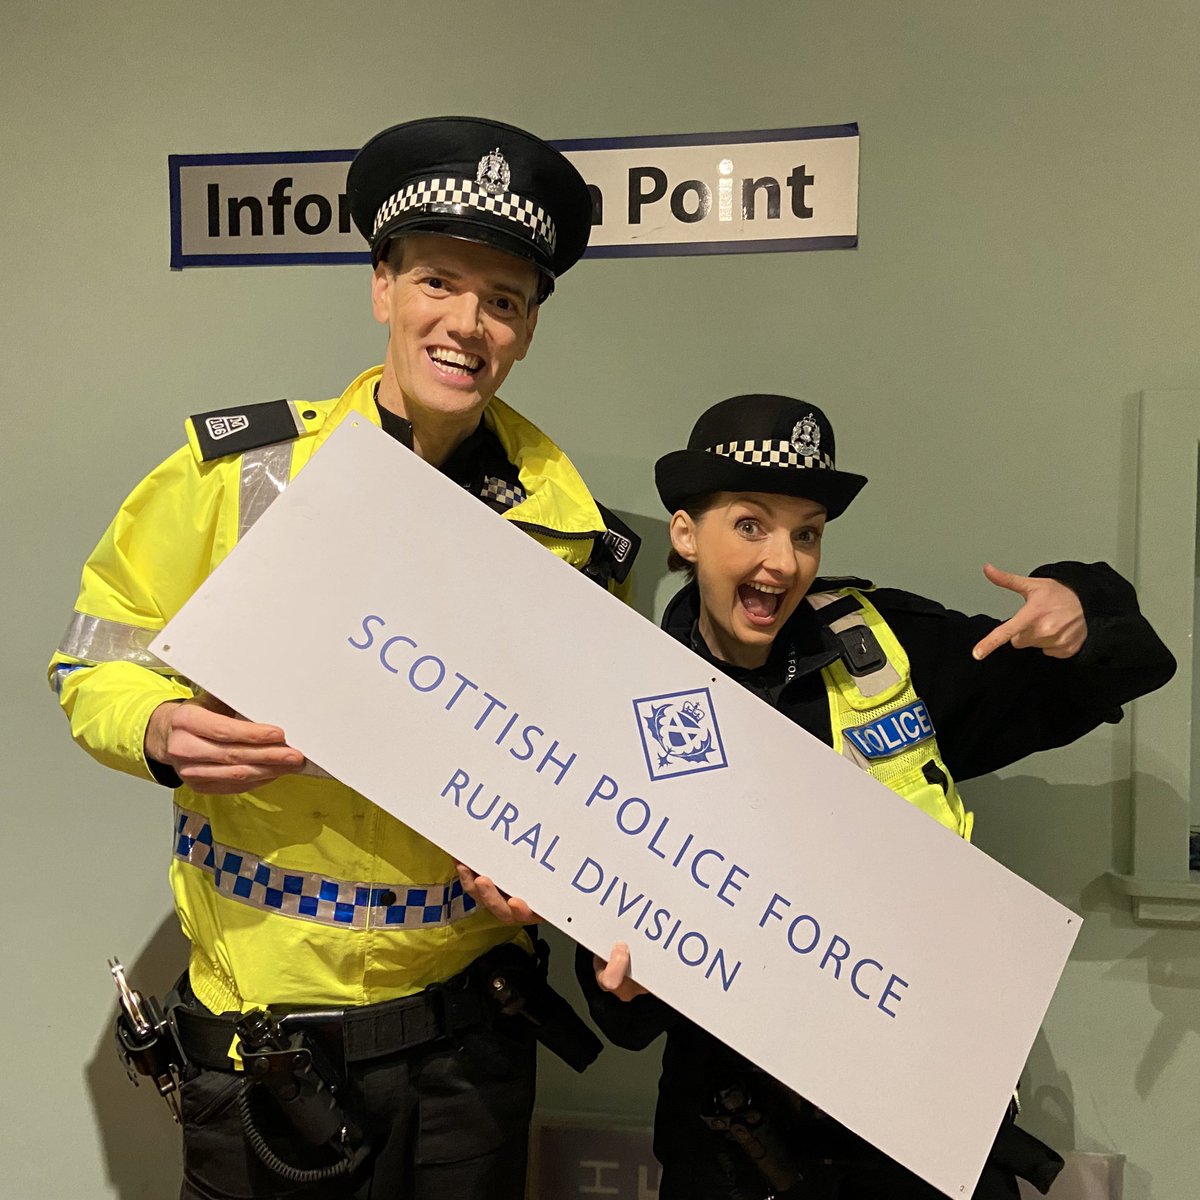 Scot Squad Series 8 👮🏻‍♂️🚓

#willtheywontthey 🤷‍♂️